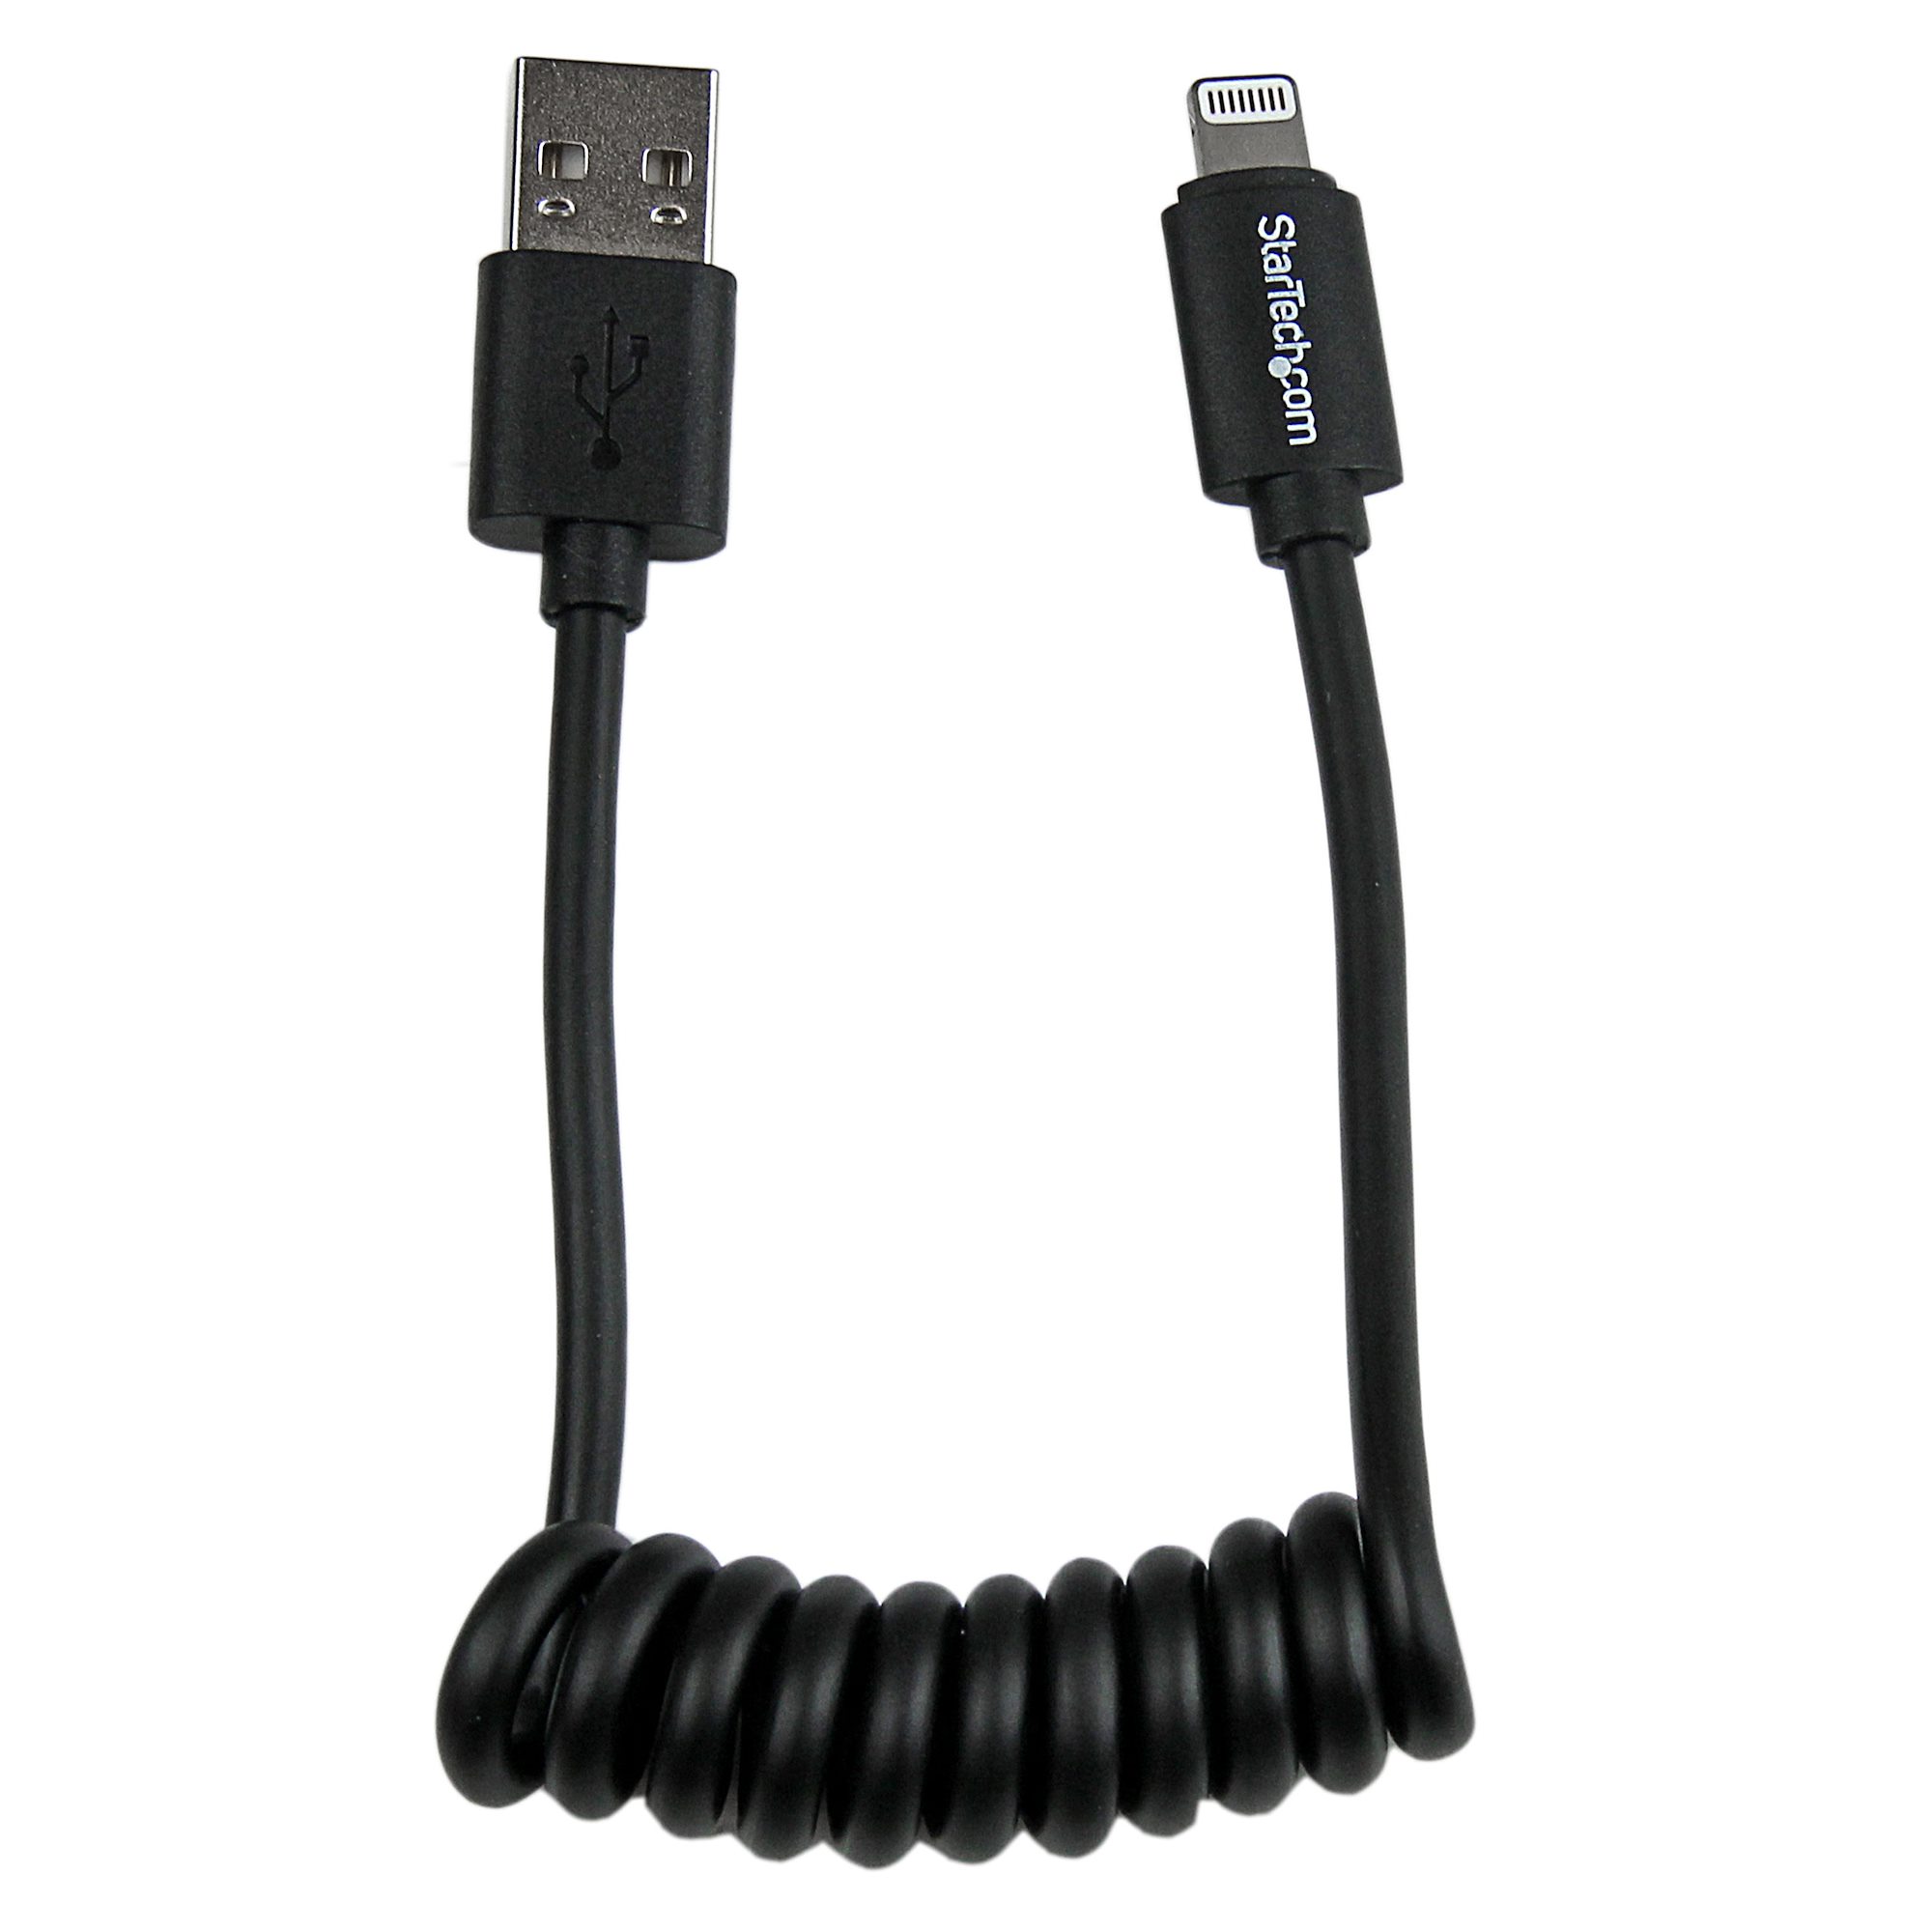 Belkin Fast Car Charger 30-Pin USB Data Sync/Charger Cable for Apple iPad 1 2 3 